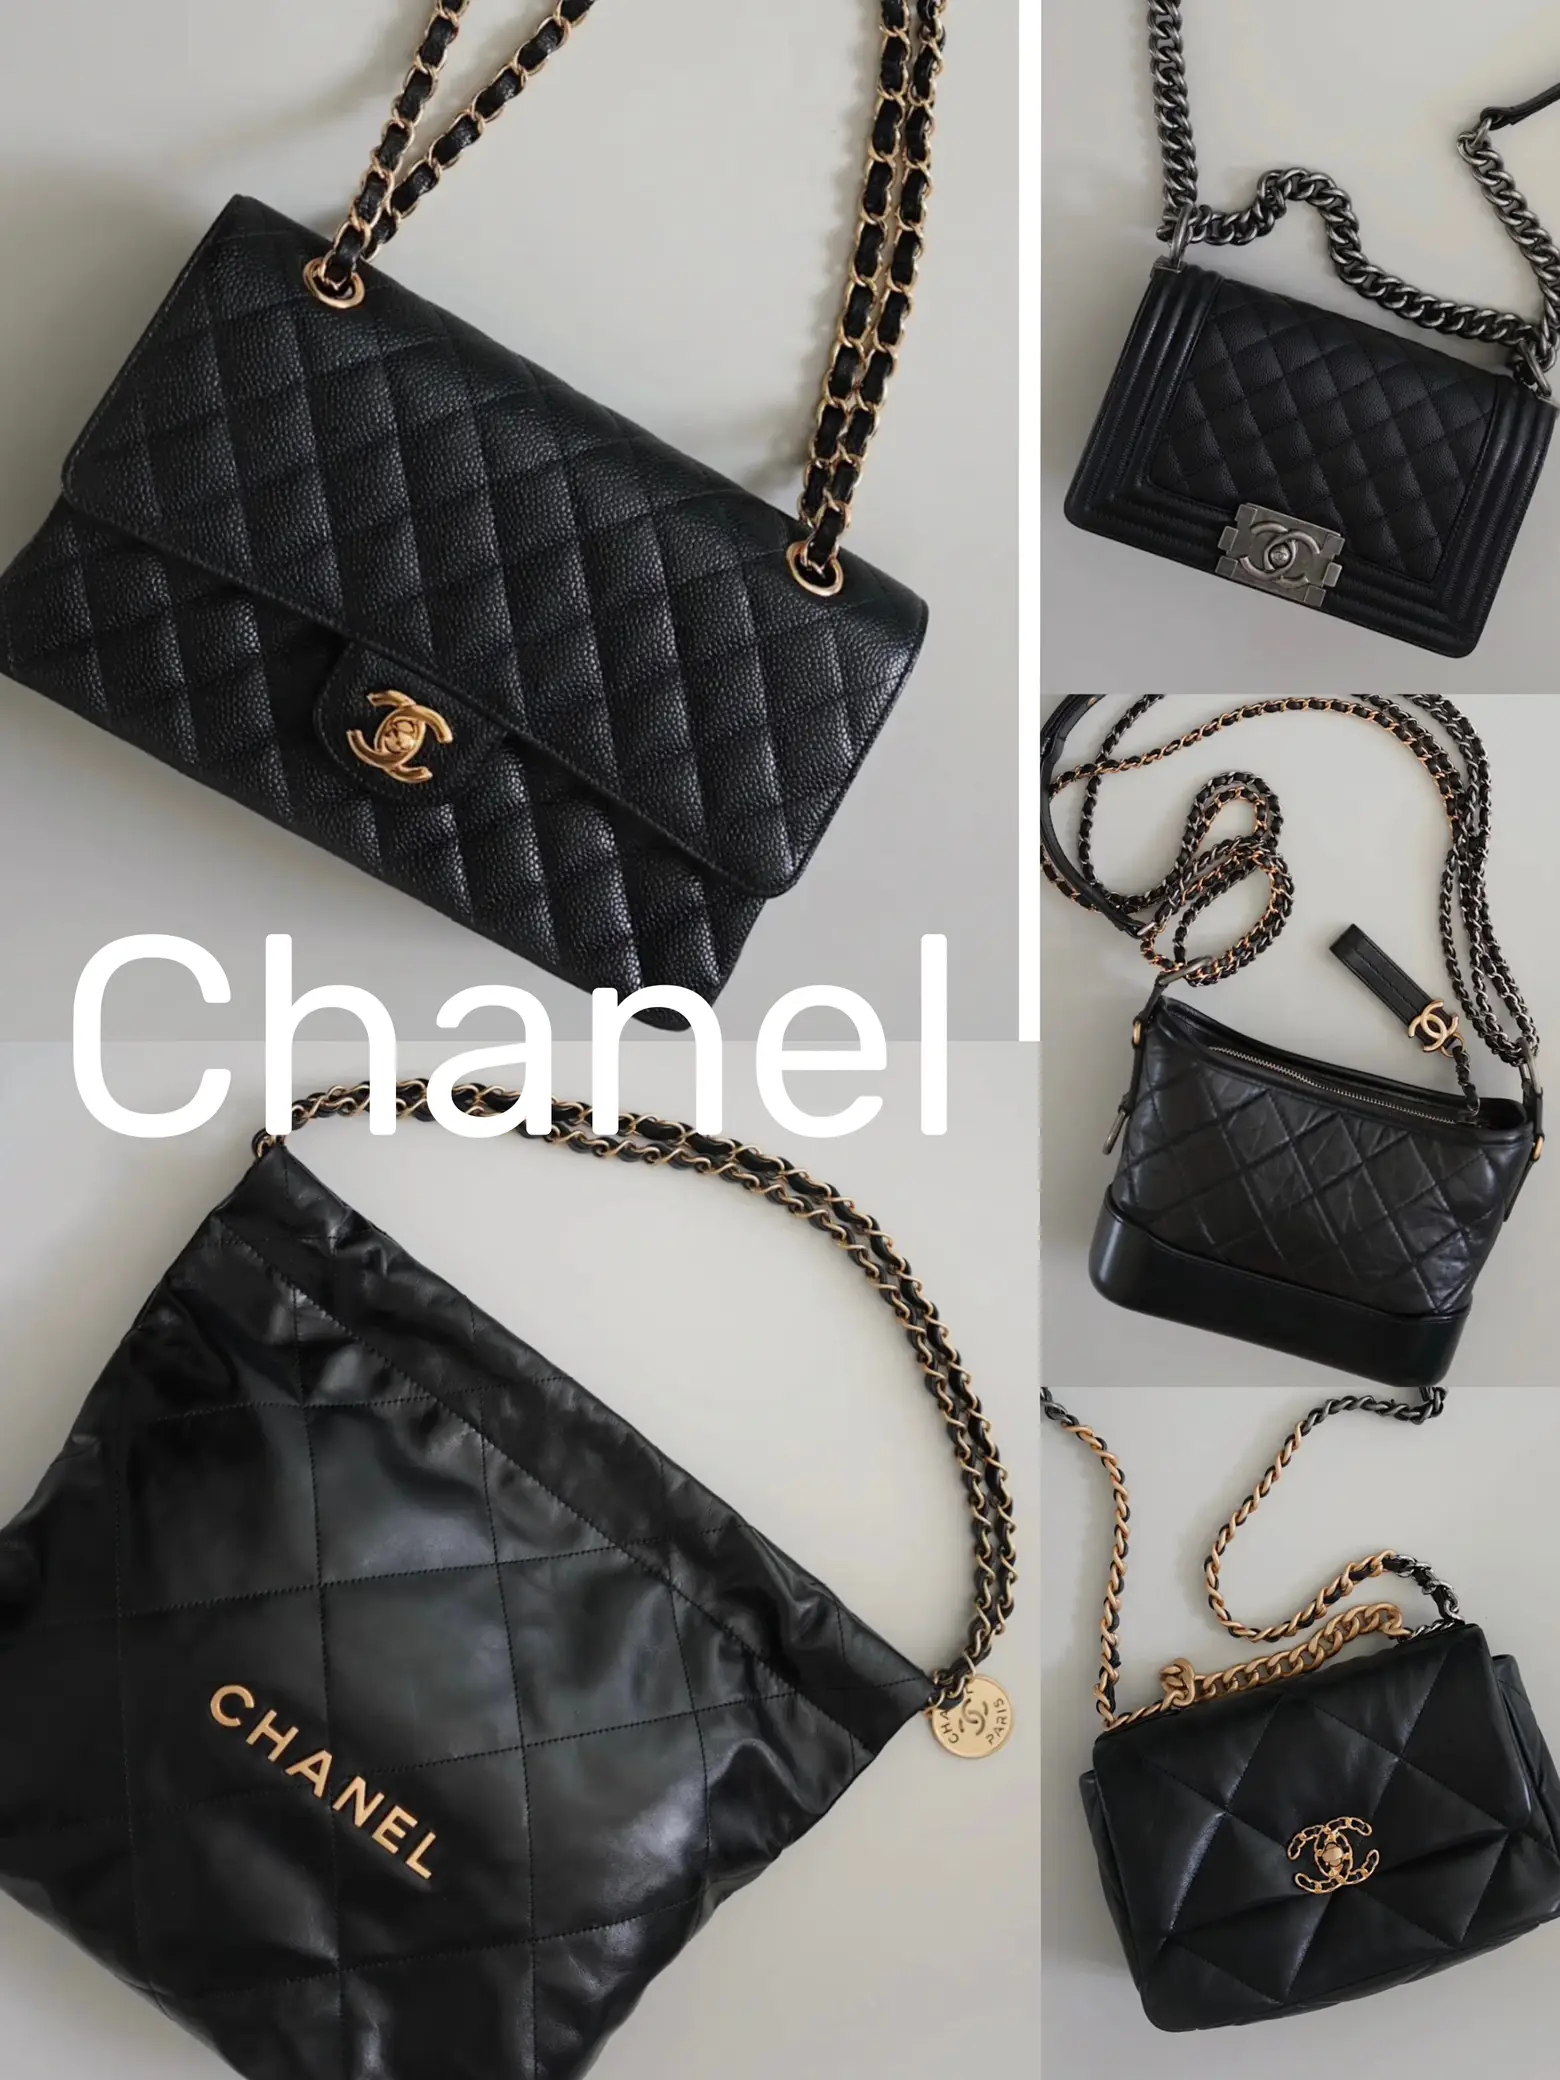 Chanel Mini Square Honest Review: Pros and Cons